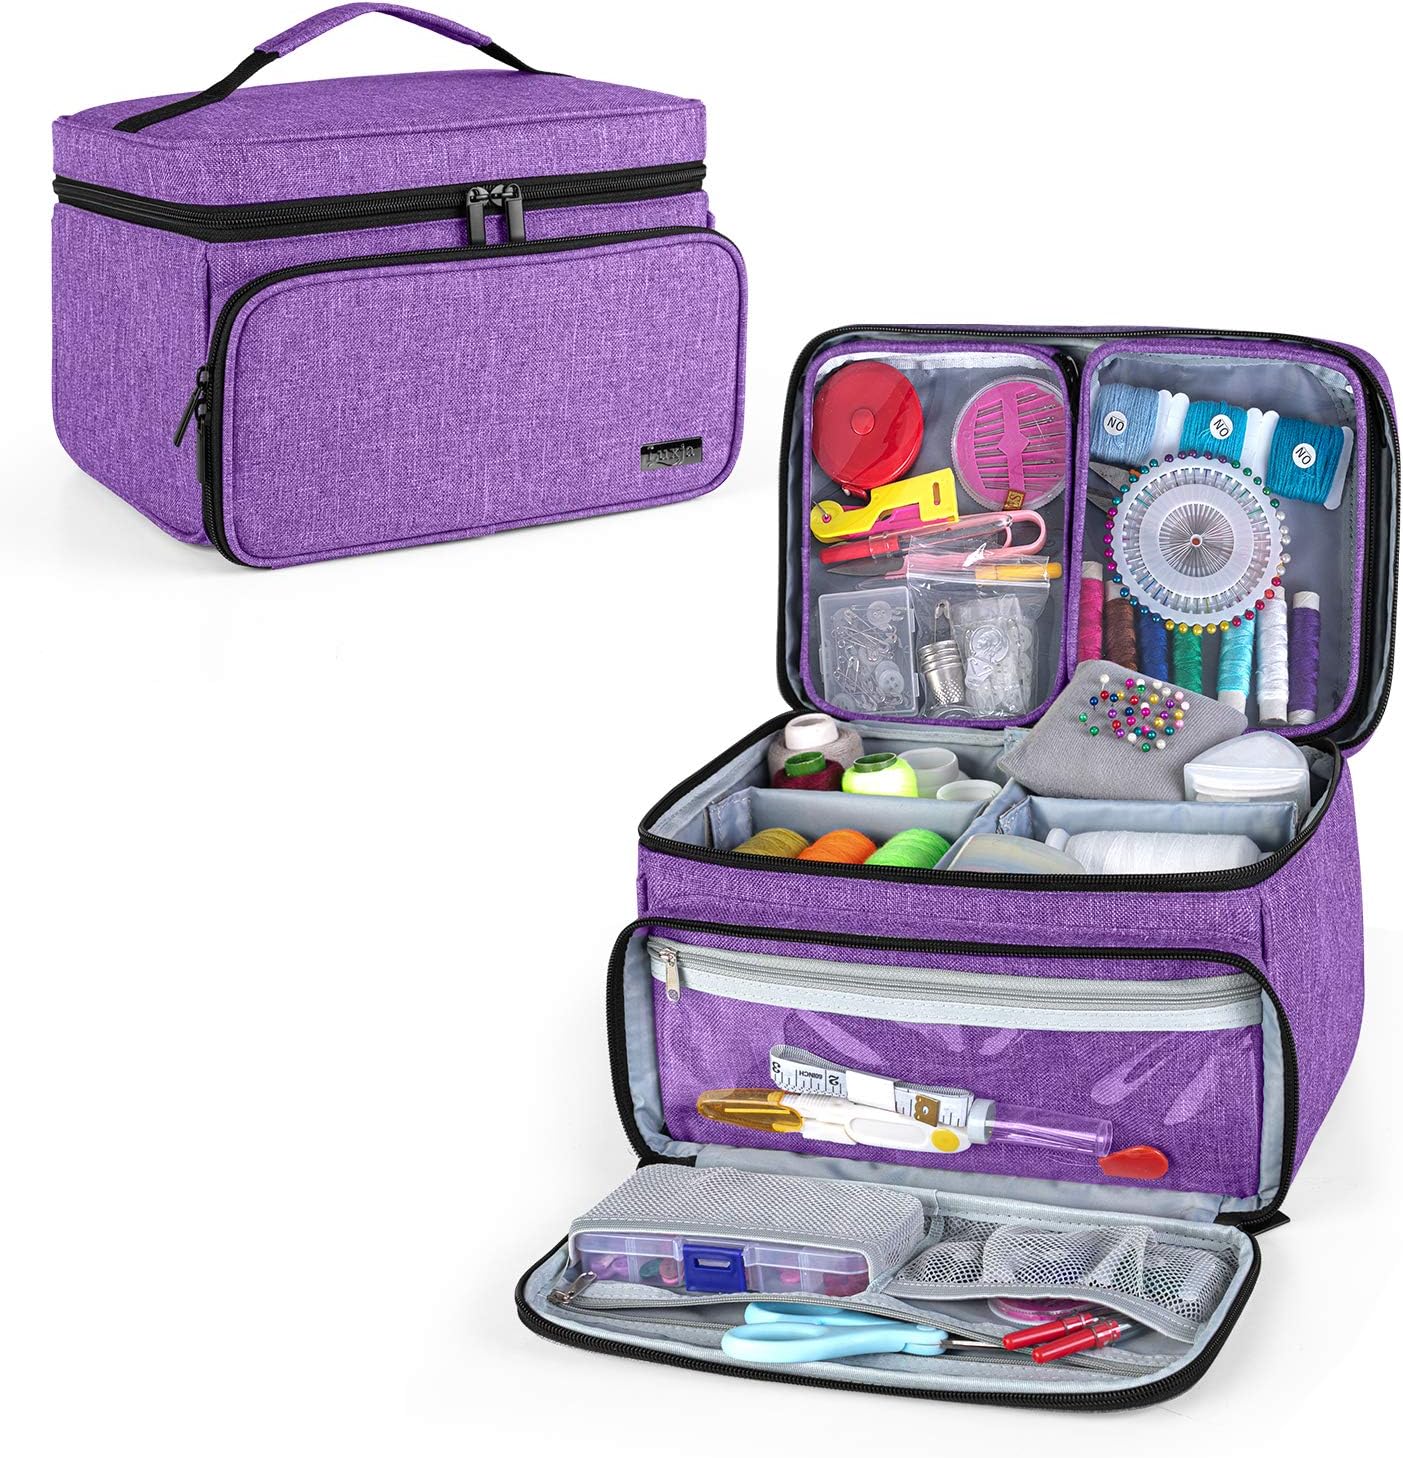 Luxja Sewing Accessories Organizer with 2 Detachable Clear Pockets, Sewing Supplies Organizer (Patent Design), Purple